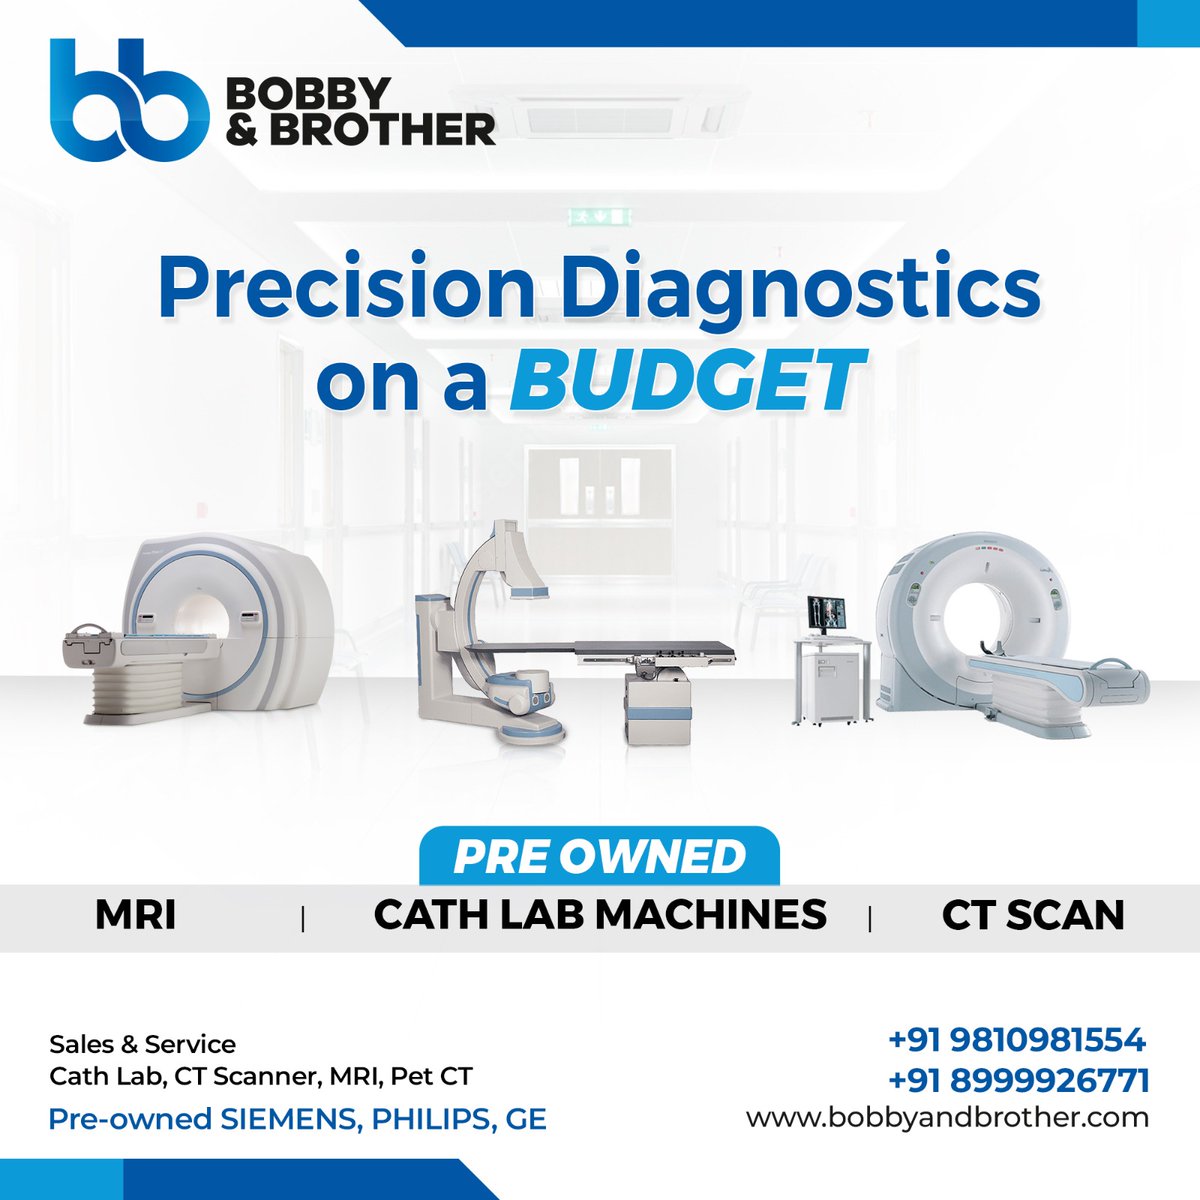 Pre-Owned CT Scans, MRIs, and Cath Lab Machines!
Get top-quality, reliable diagnostics at a fraction of the cost. Enhance patient care and boost your practice's efficiency with high-grade, expertly refurbished equipment.

#BobbyAndBrother #MedicalIndustry #CTScan #MRI  #India